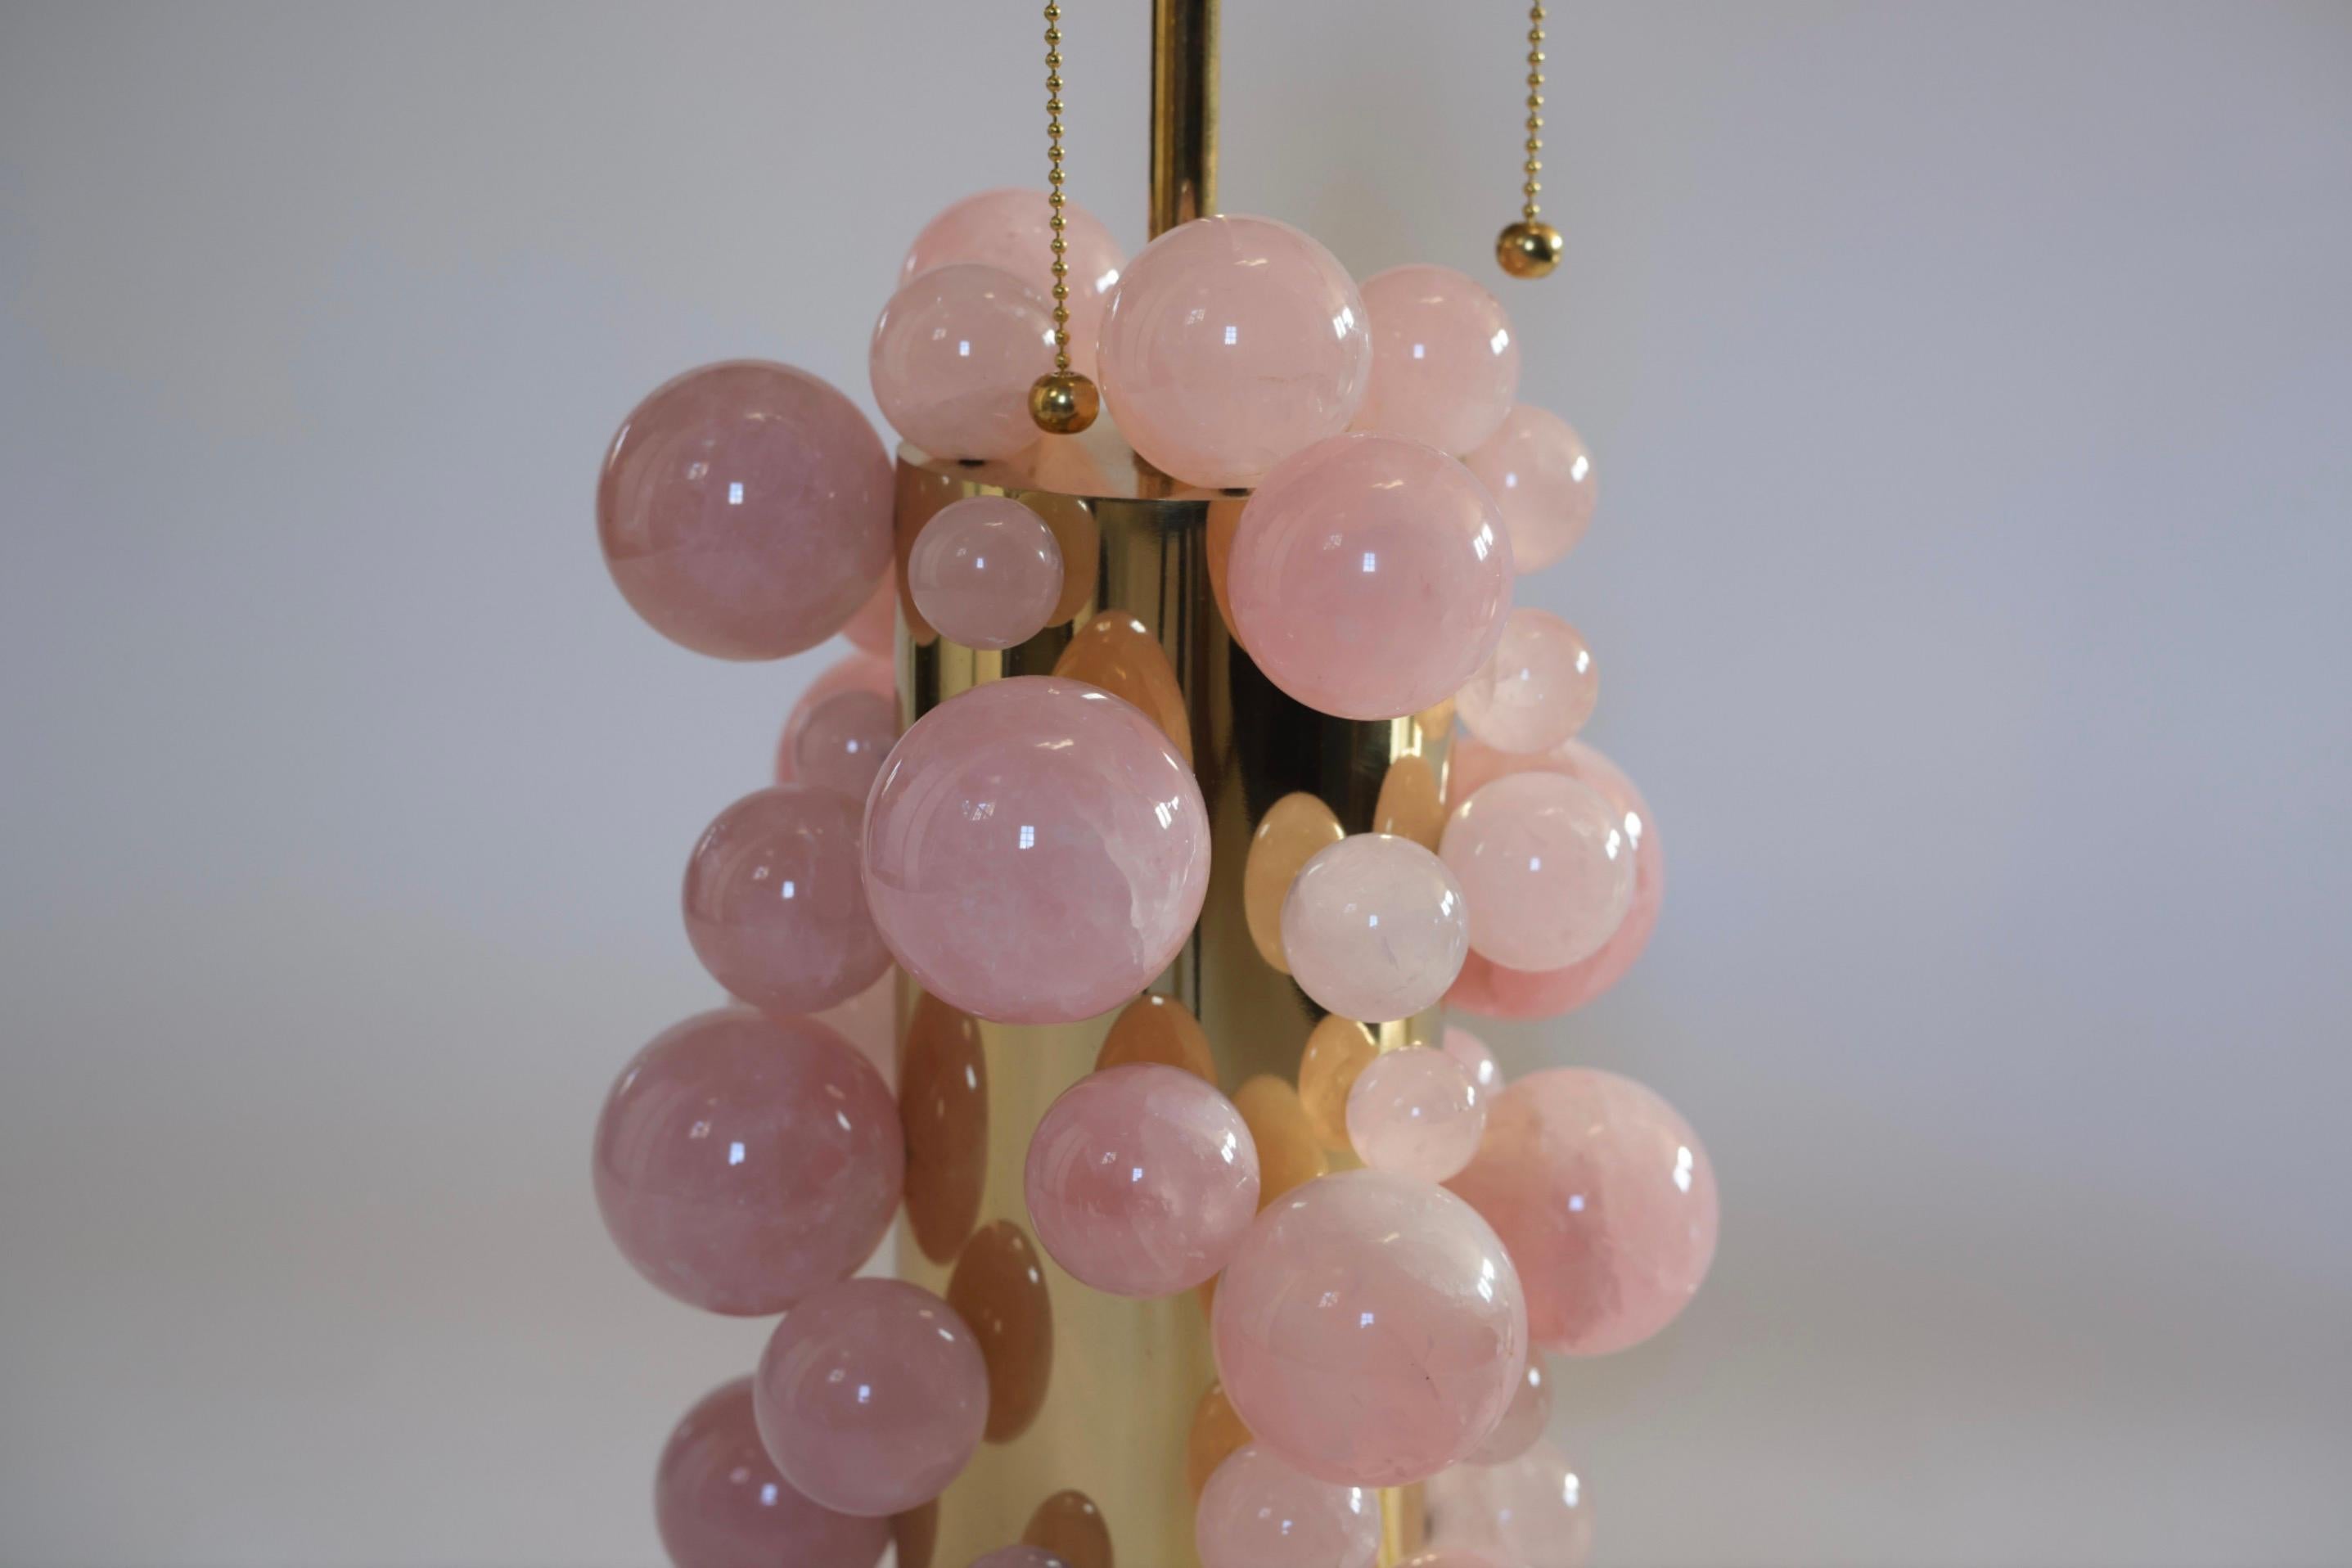 Pink rock crystal bubble lamp with polished brass finishes, created by Phoenix Gallery, NYC. Measures: To the rock crystal part 13in / H. Overall height 24.5 inches High, Lampshade is not included